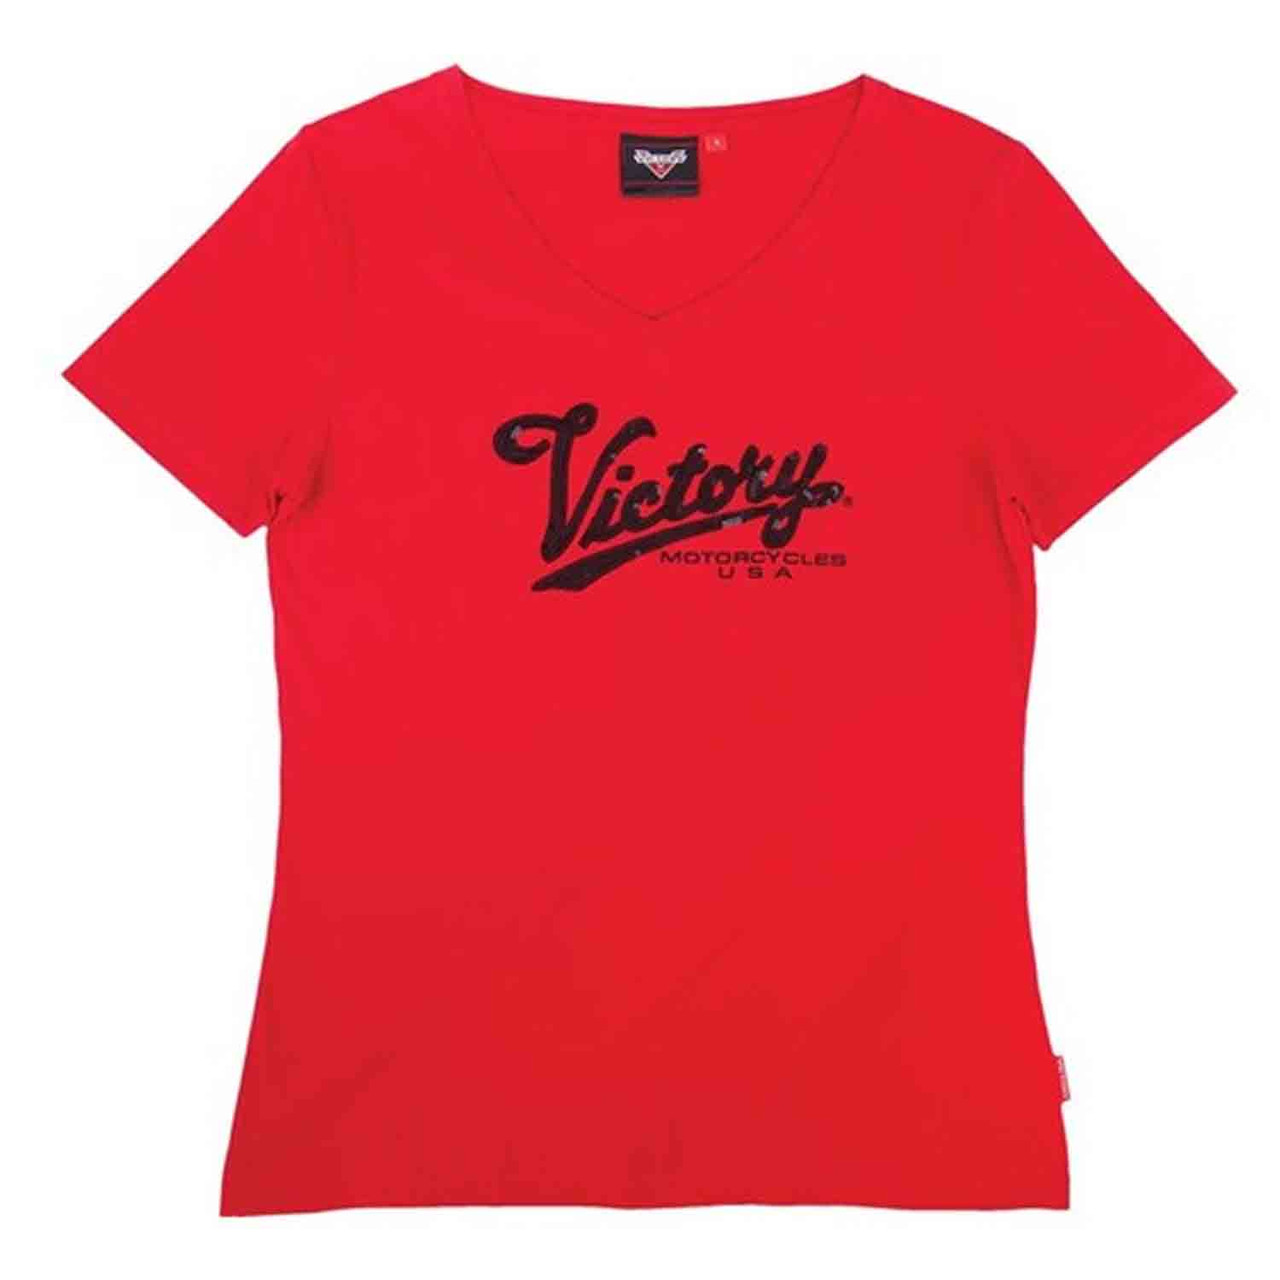 Victory Motorcycle New OEM Women's Red Sequin Logo Tee Shirt, X-Small, 286440001